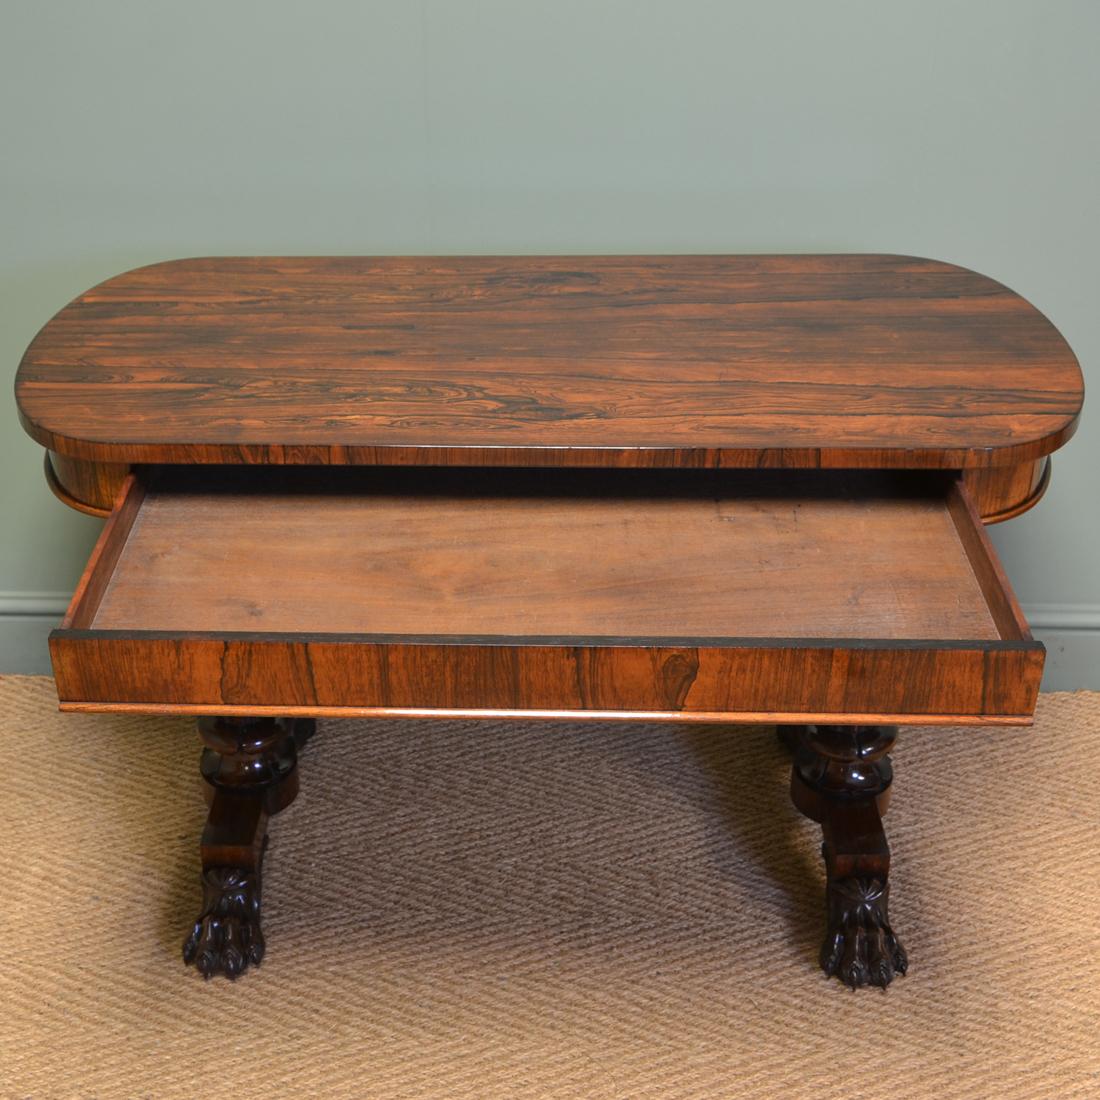 Spectacular William IV figured rosewood antique writing table

With the most spectacular figured top above a frieze with mahogany lined frieze drawer this quality antique writing table dates from circa 1835. It stands on an elegant carved pedestal